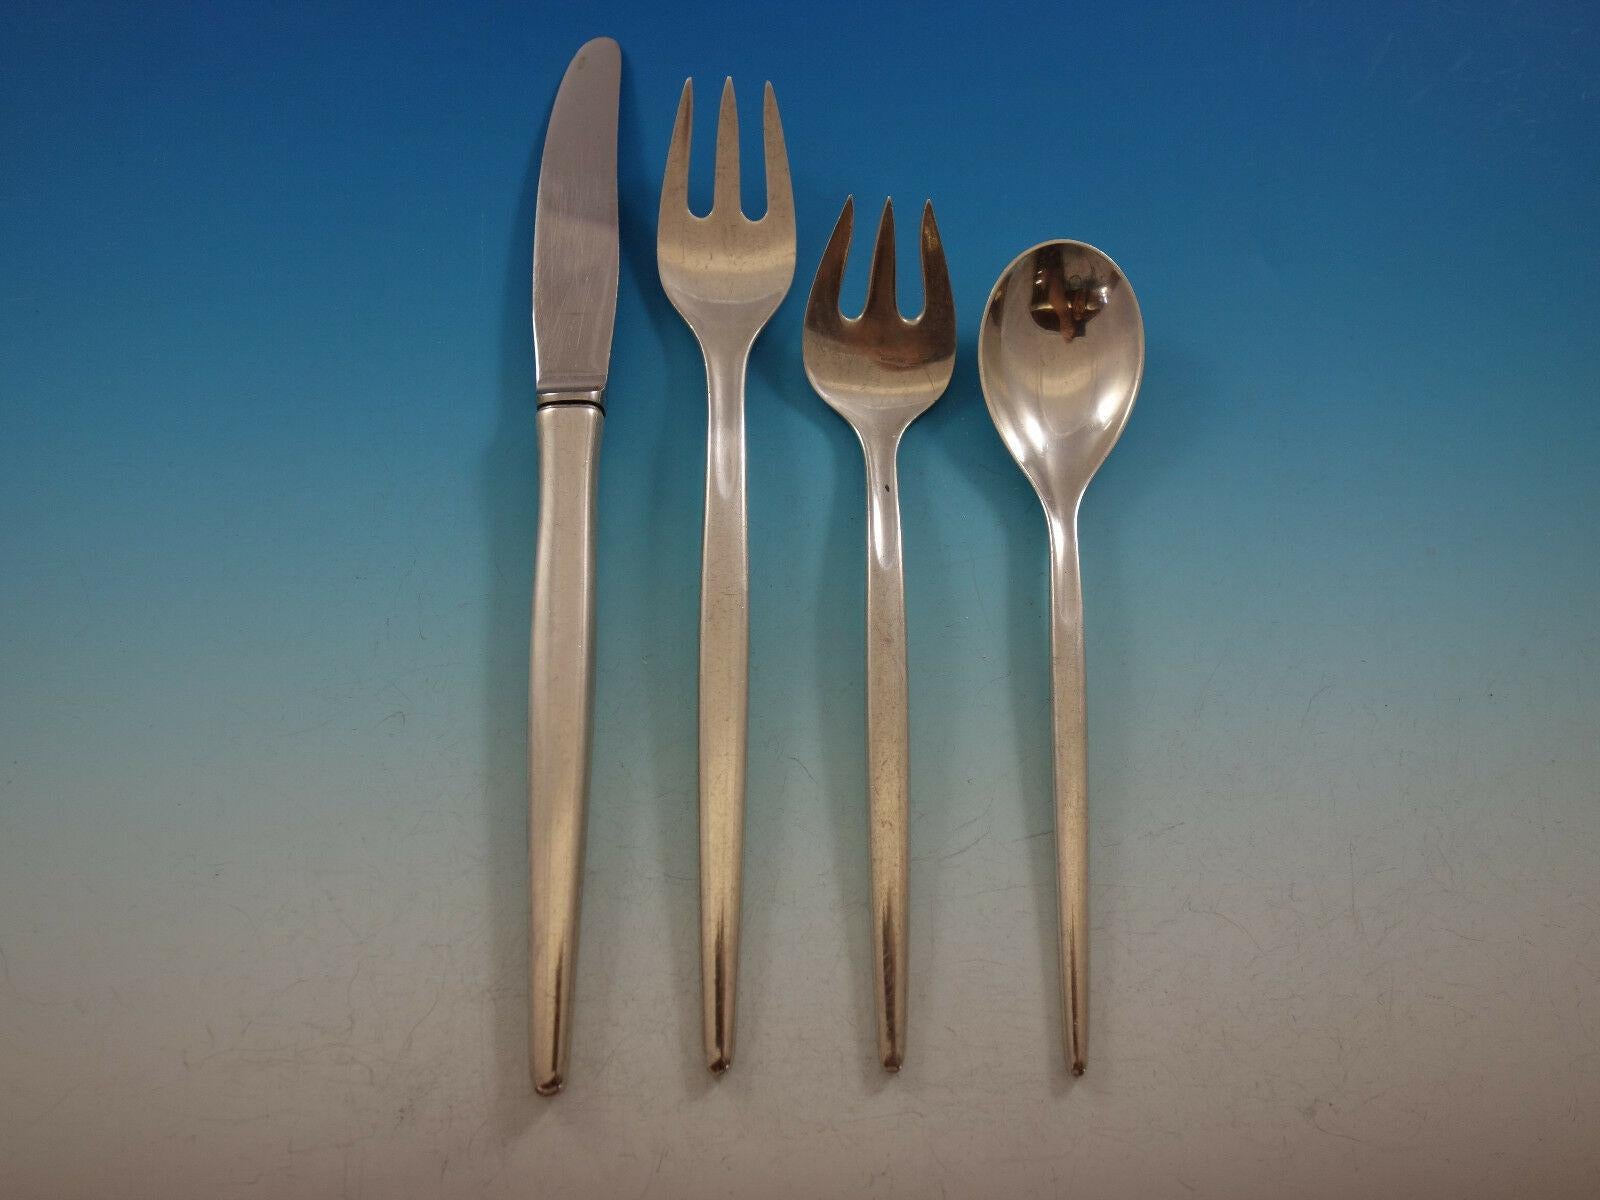 Scandinavian Modern Tulip by Michelsen sterling silver flatware set, 76 pieces. This set includes:

12 knives, 8 1/2